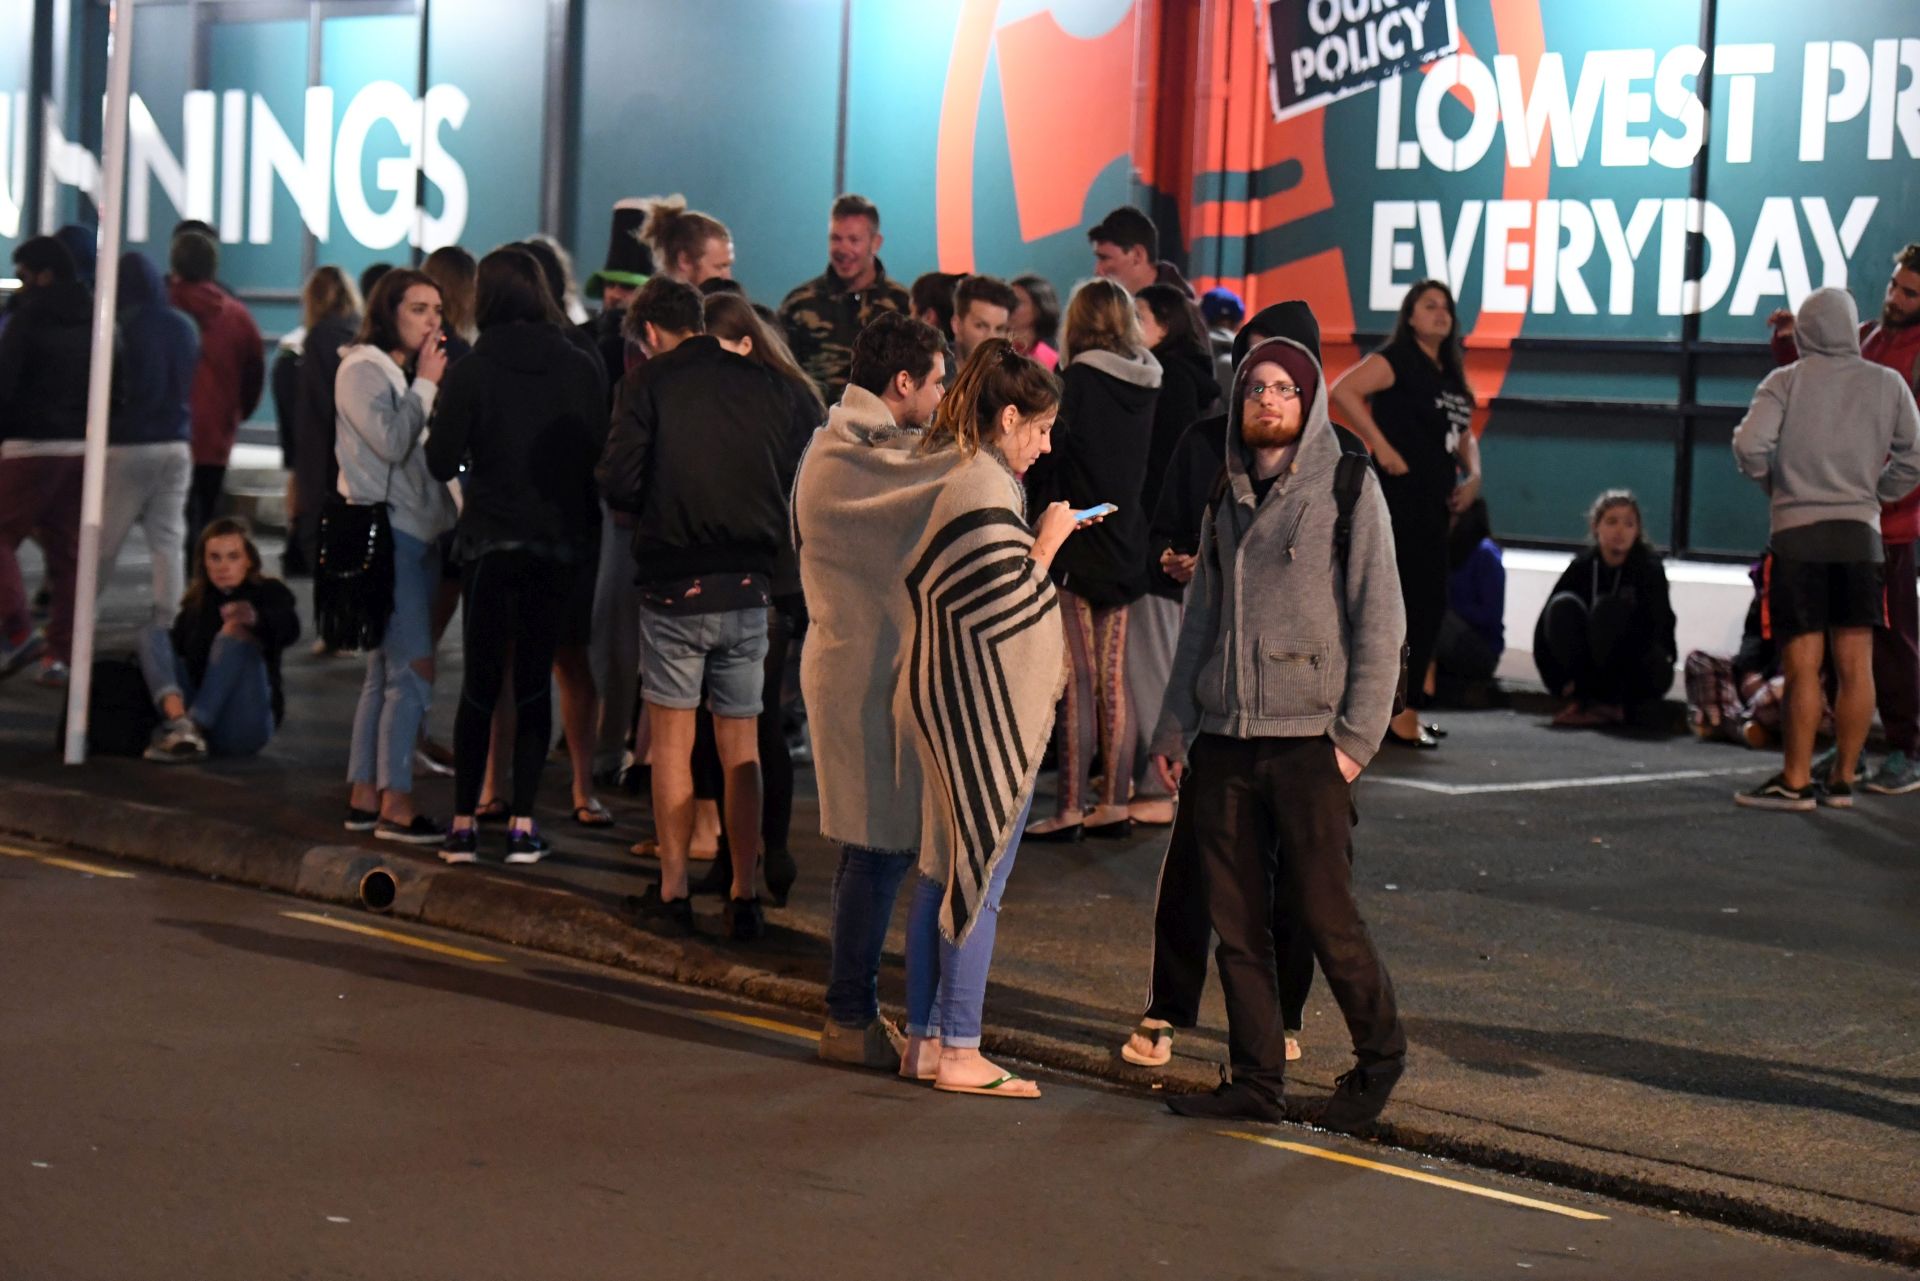 epa05629736 People stand in Tory Street after being evacuated in Wewllington after an earthquake based around Cheviot in the South island shock the capital, New Zealand, early 14 November 2016. According to reports, a 7.4. earthqauke has hit New Zealand overnight, triggering a tsunami warning for the east coast of the country.  EPA/ROSS SETFORD